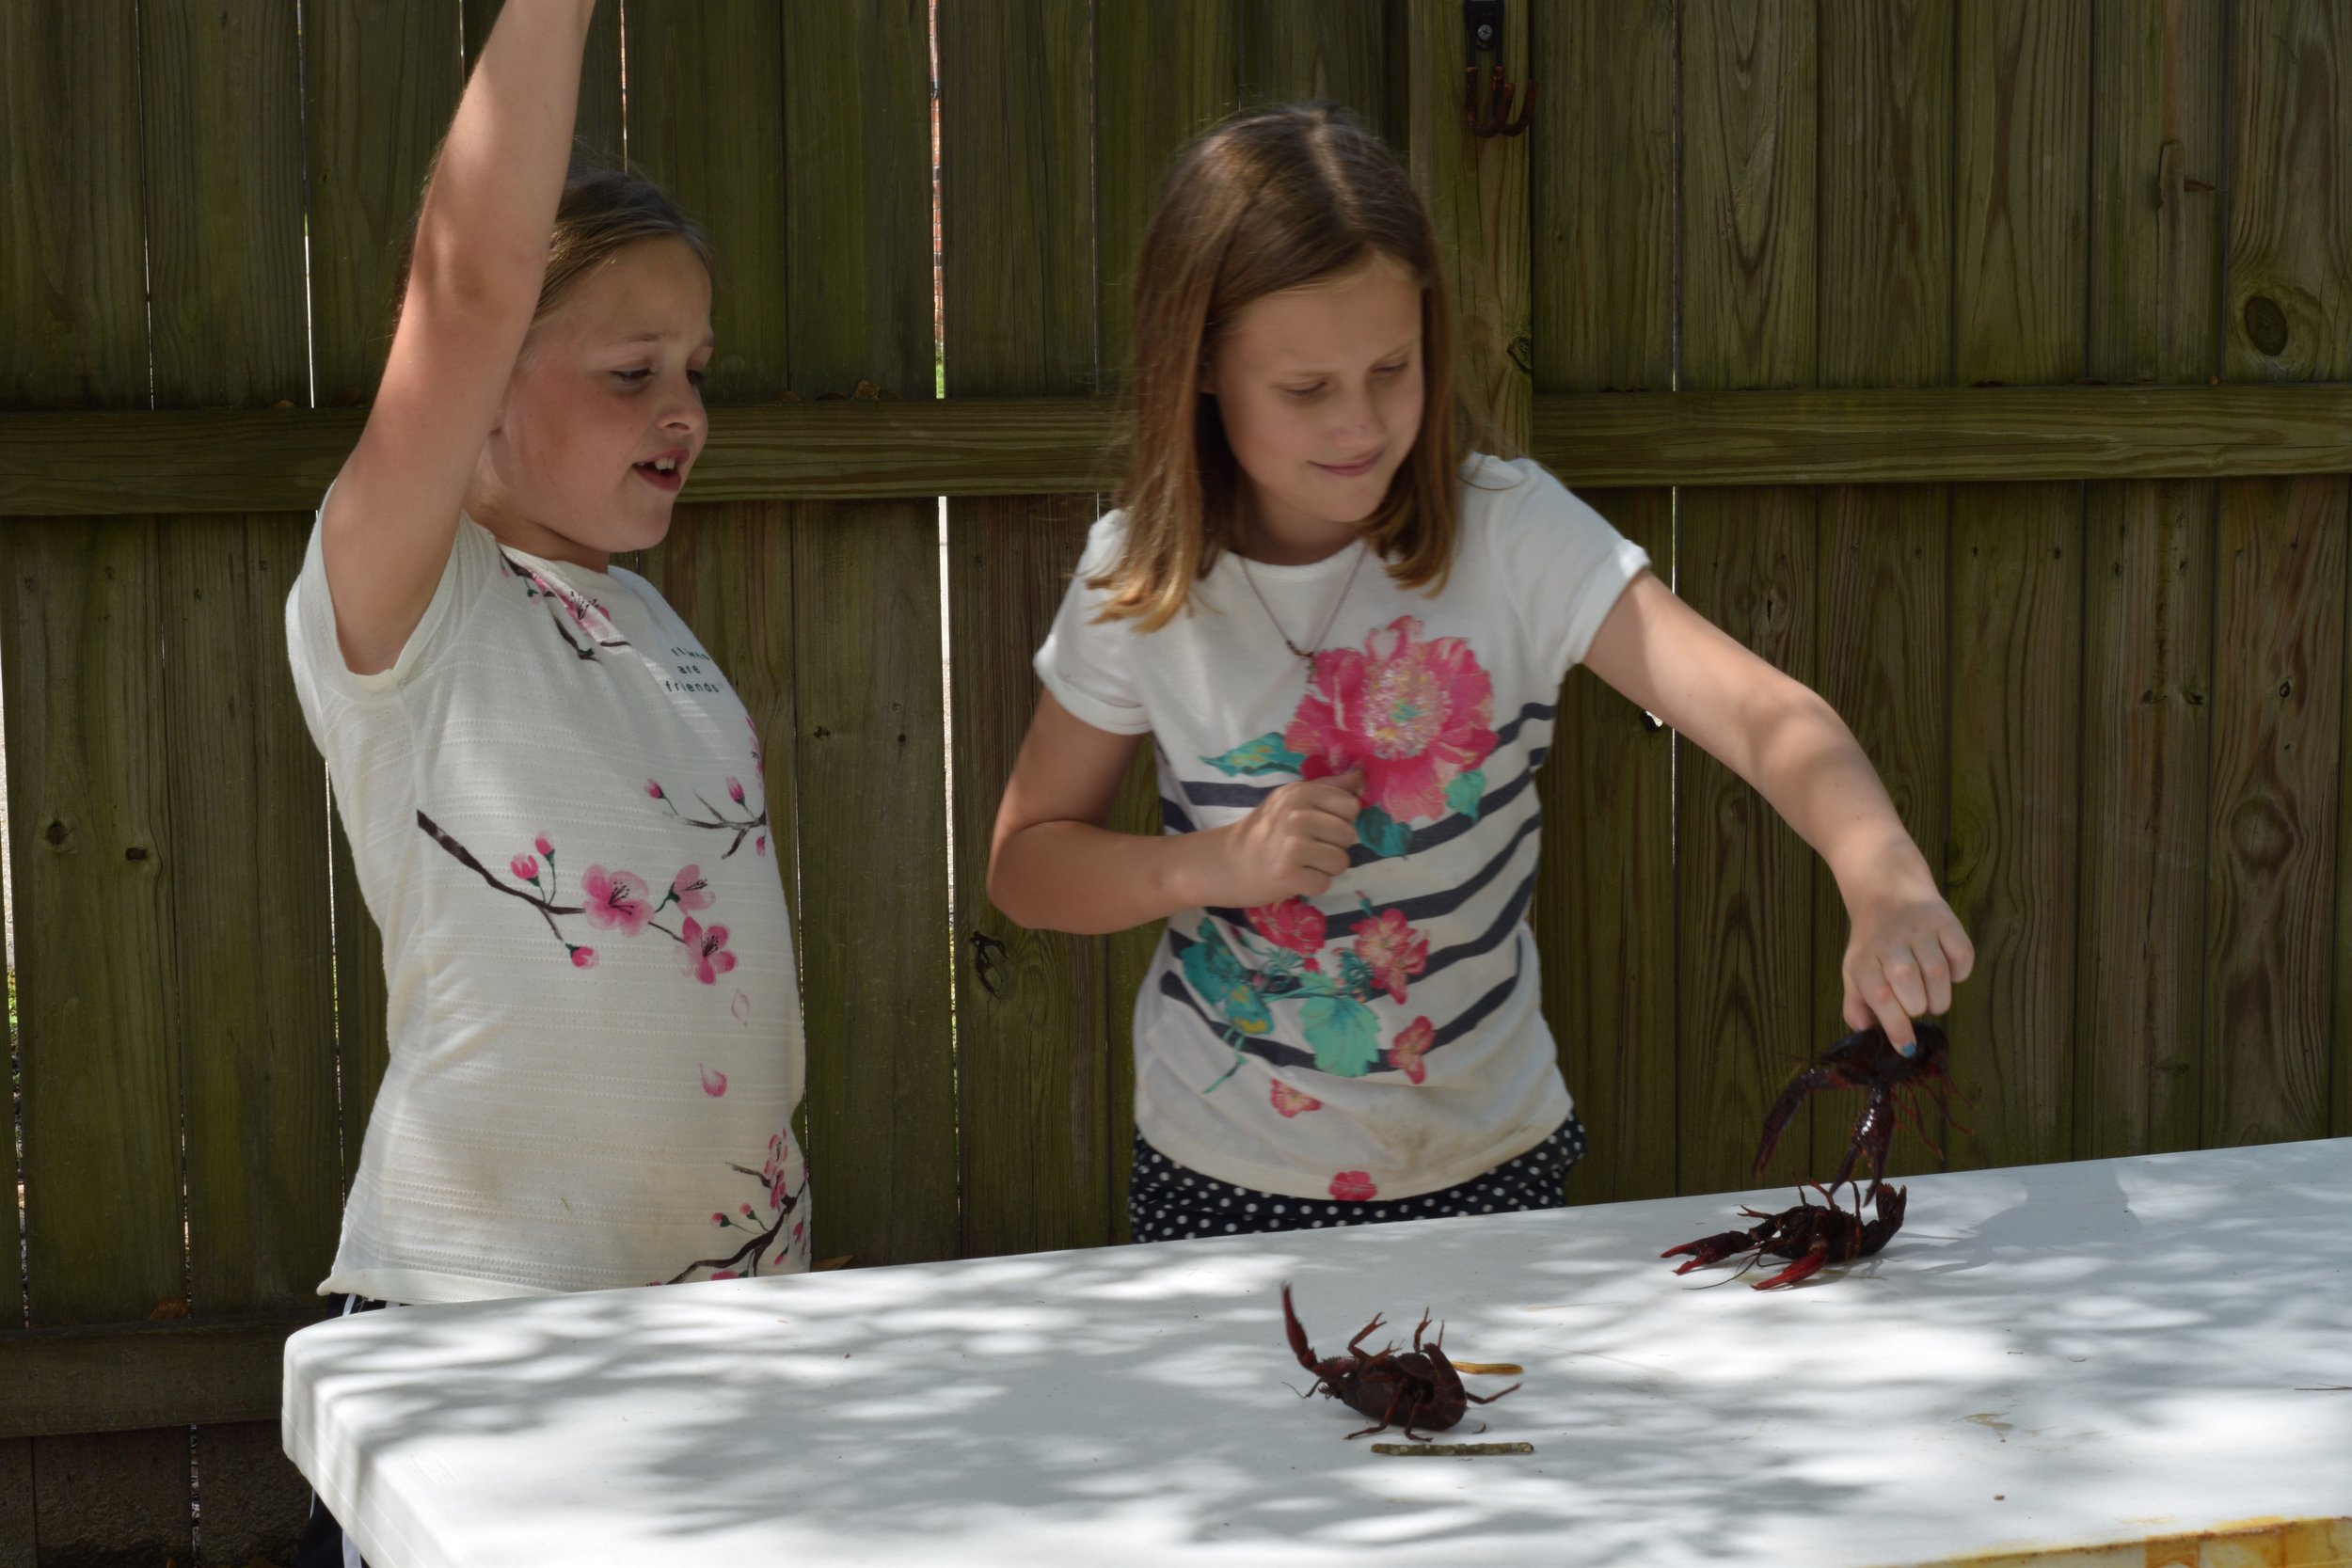 photo by emily reeves dean of kids playing with crawfish